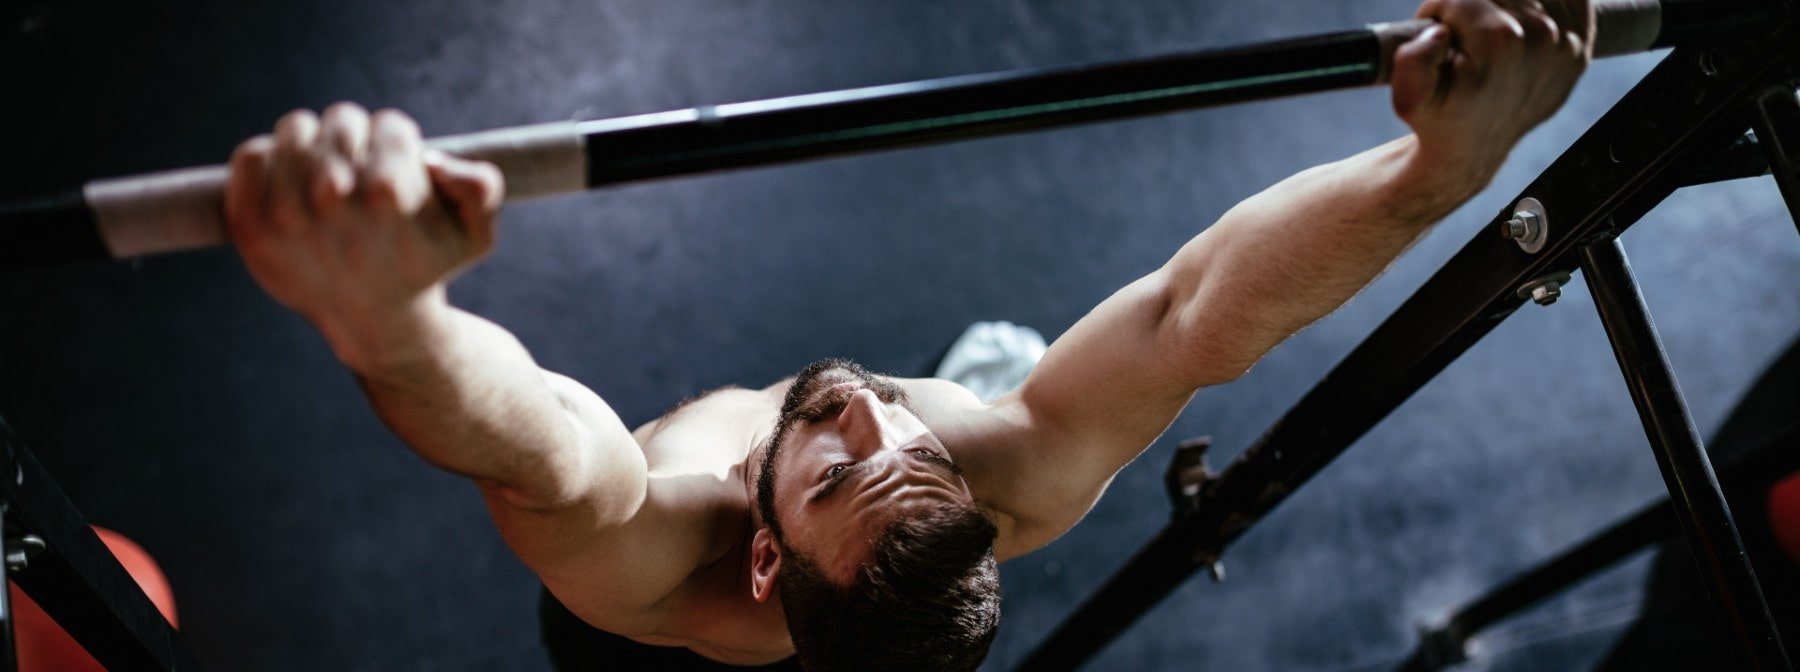 The 15 Best Forearm Exercises for Mass